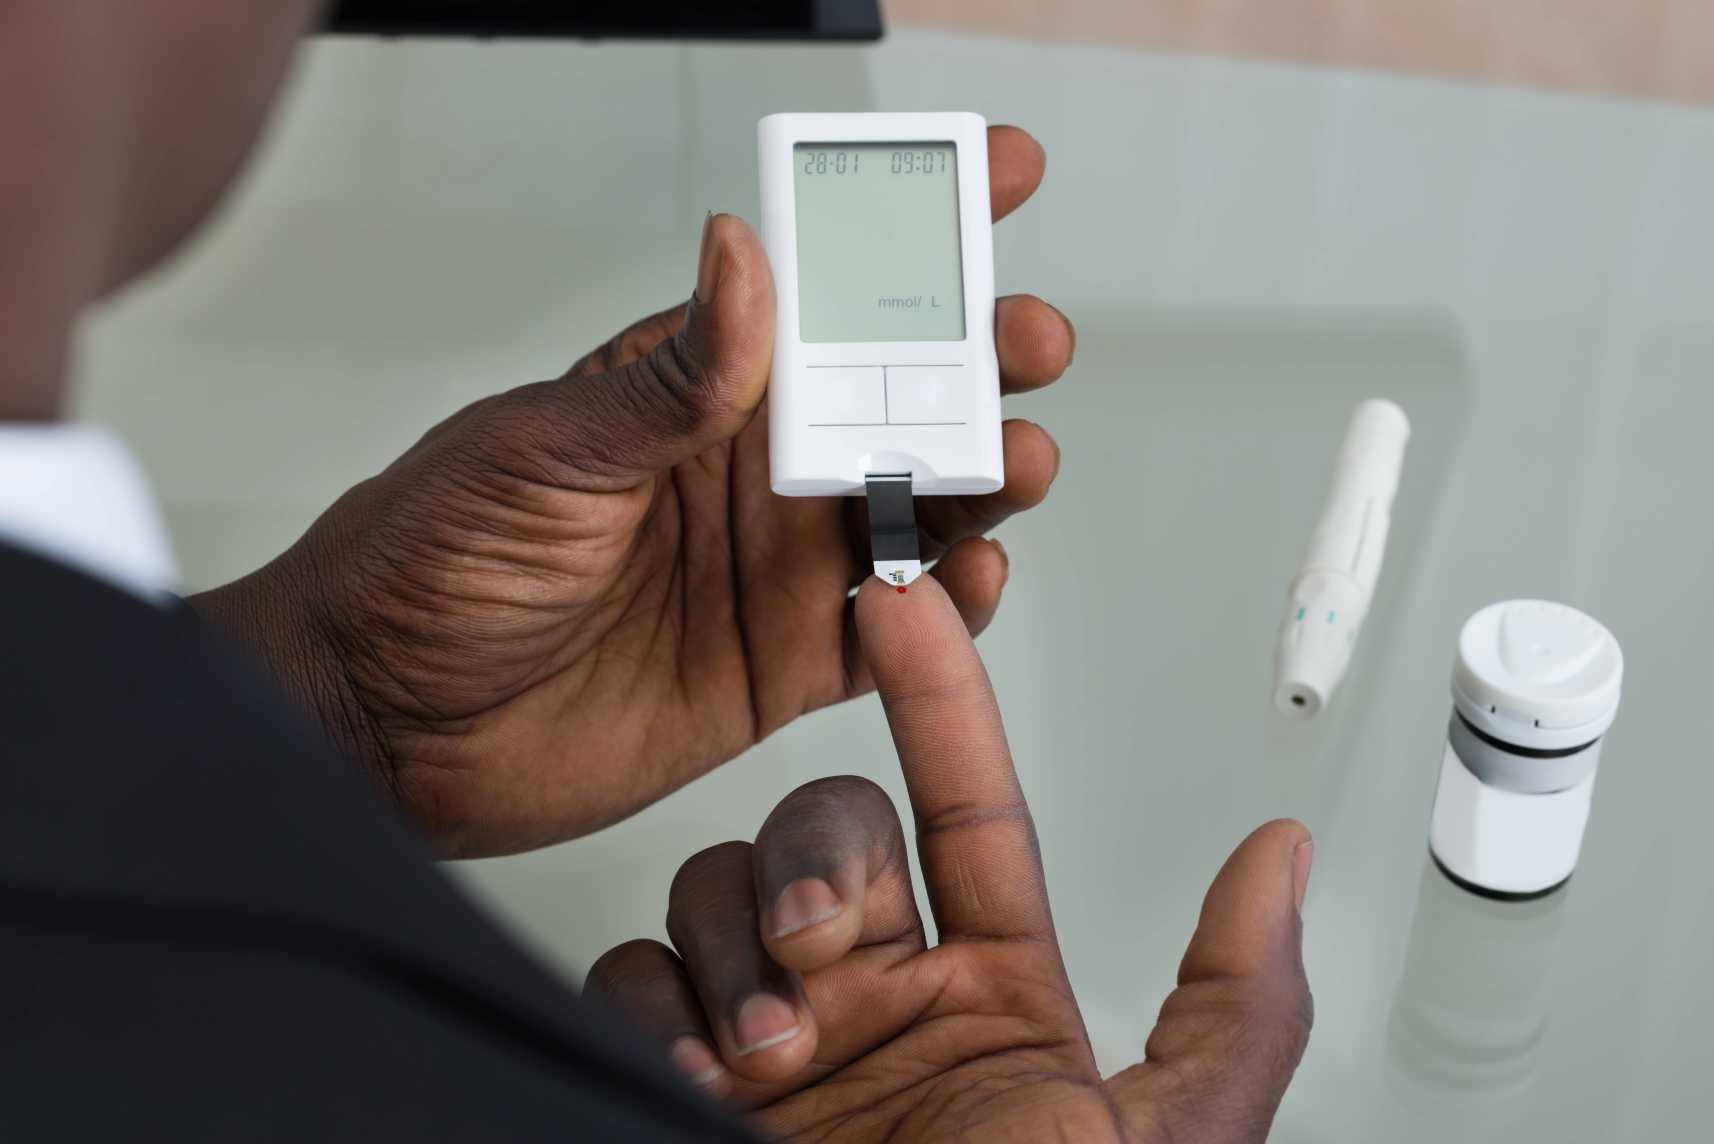 Man checking blood sugar with glucometer while wondering what can cause false high blood sugar readings